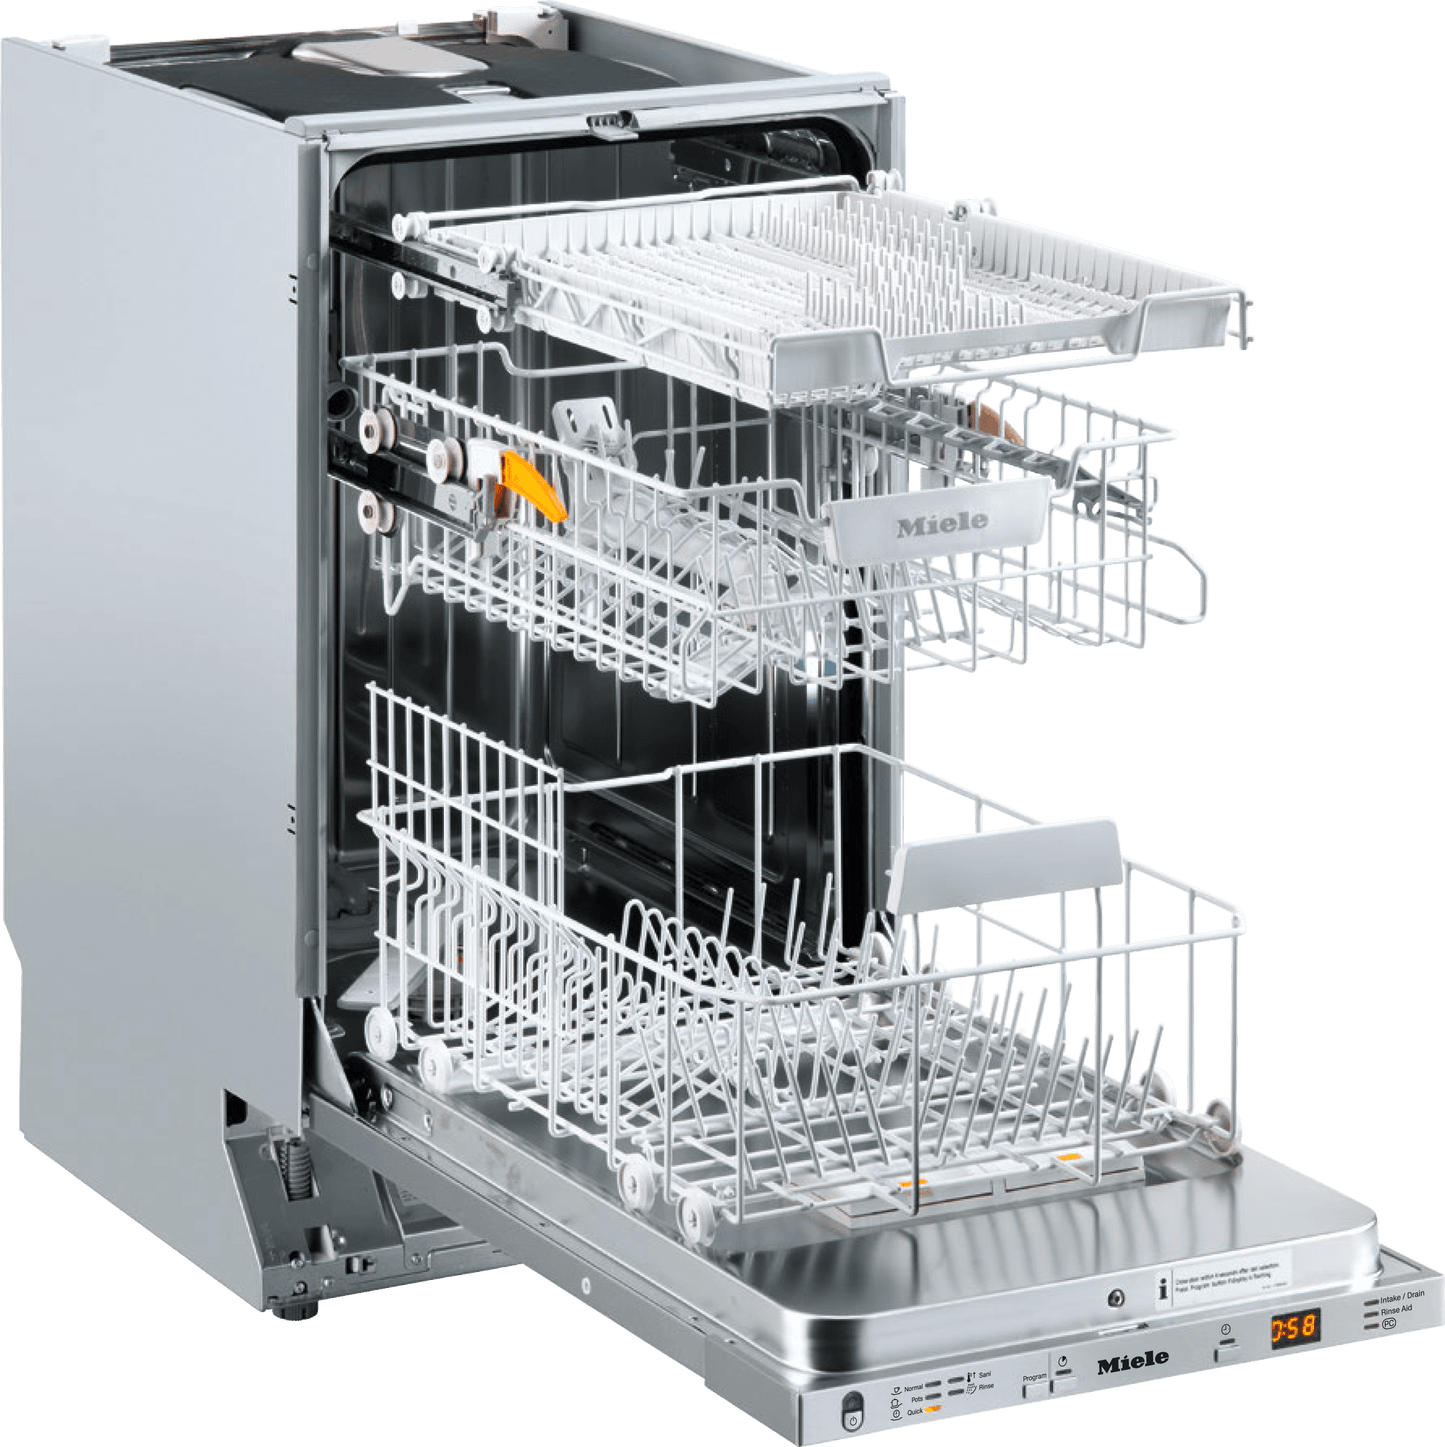 Miele G5482SCVISLSTAINLESSSTEEL G 5482 Scvi Sl - Fully Integrated Dishwasher, 18" (45 Cm) In Tried-And-Tested Miele Quality At An Affordable Entry-Level Price.